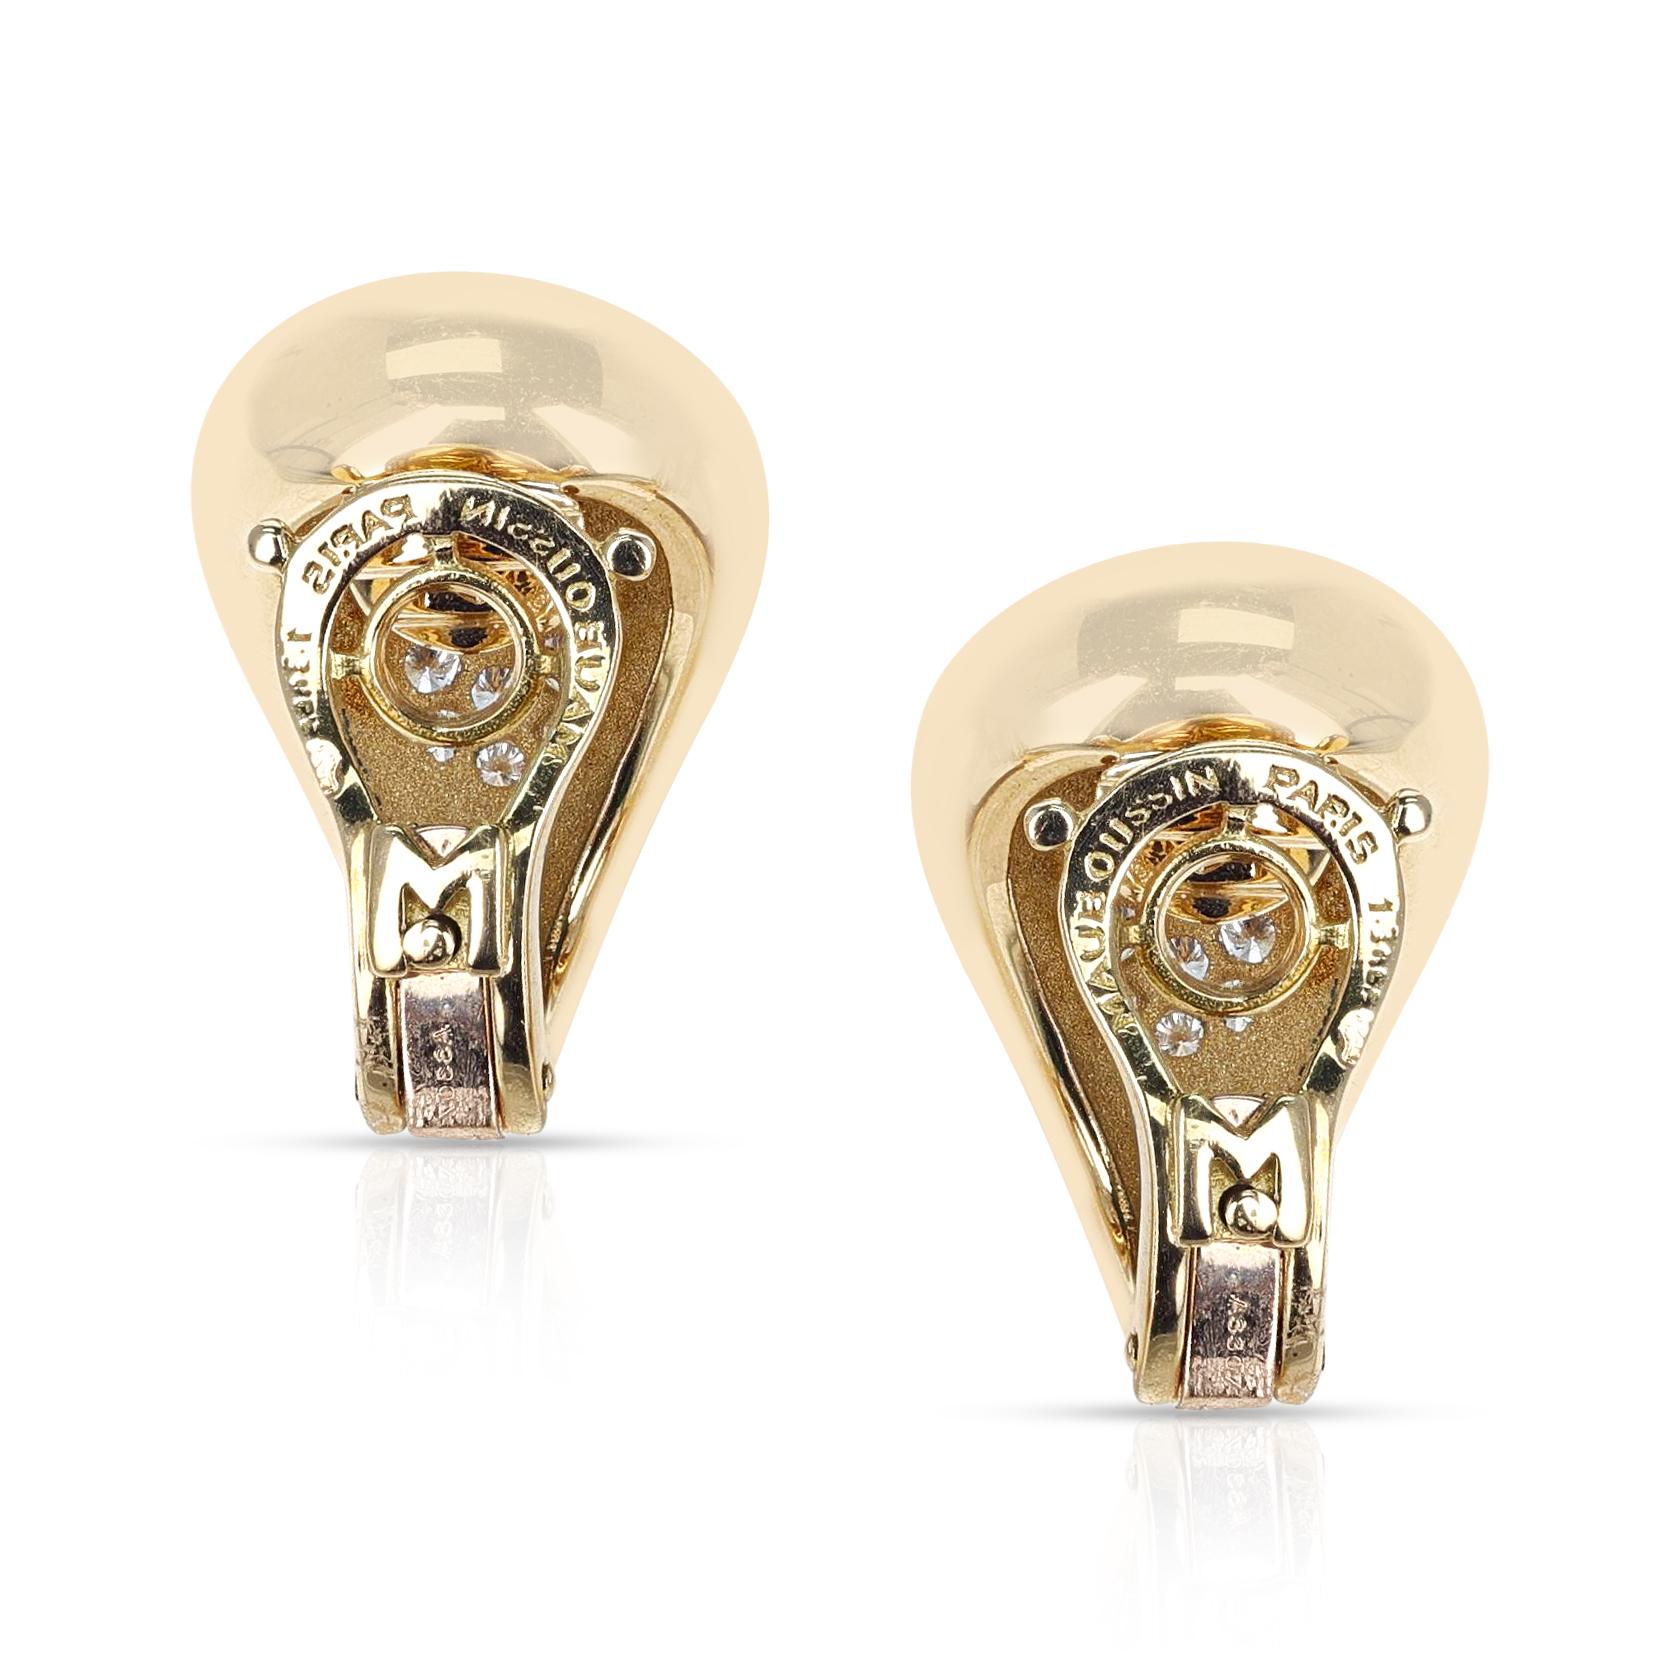 Mauboussin 2.18 ct. Citrine and 0.42 ct. Diamond Earrings, 18K Gold For Sale 1